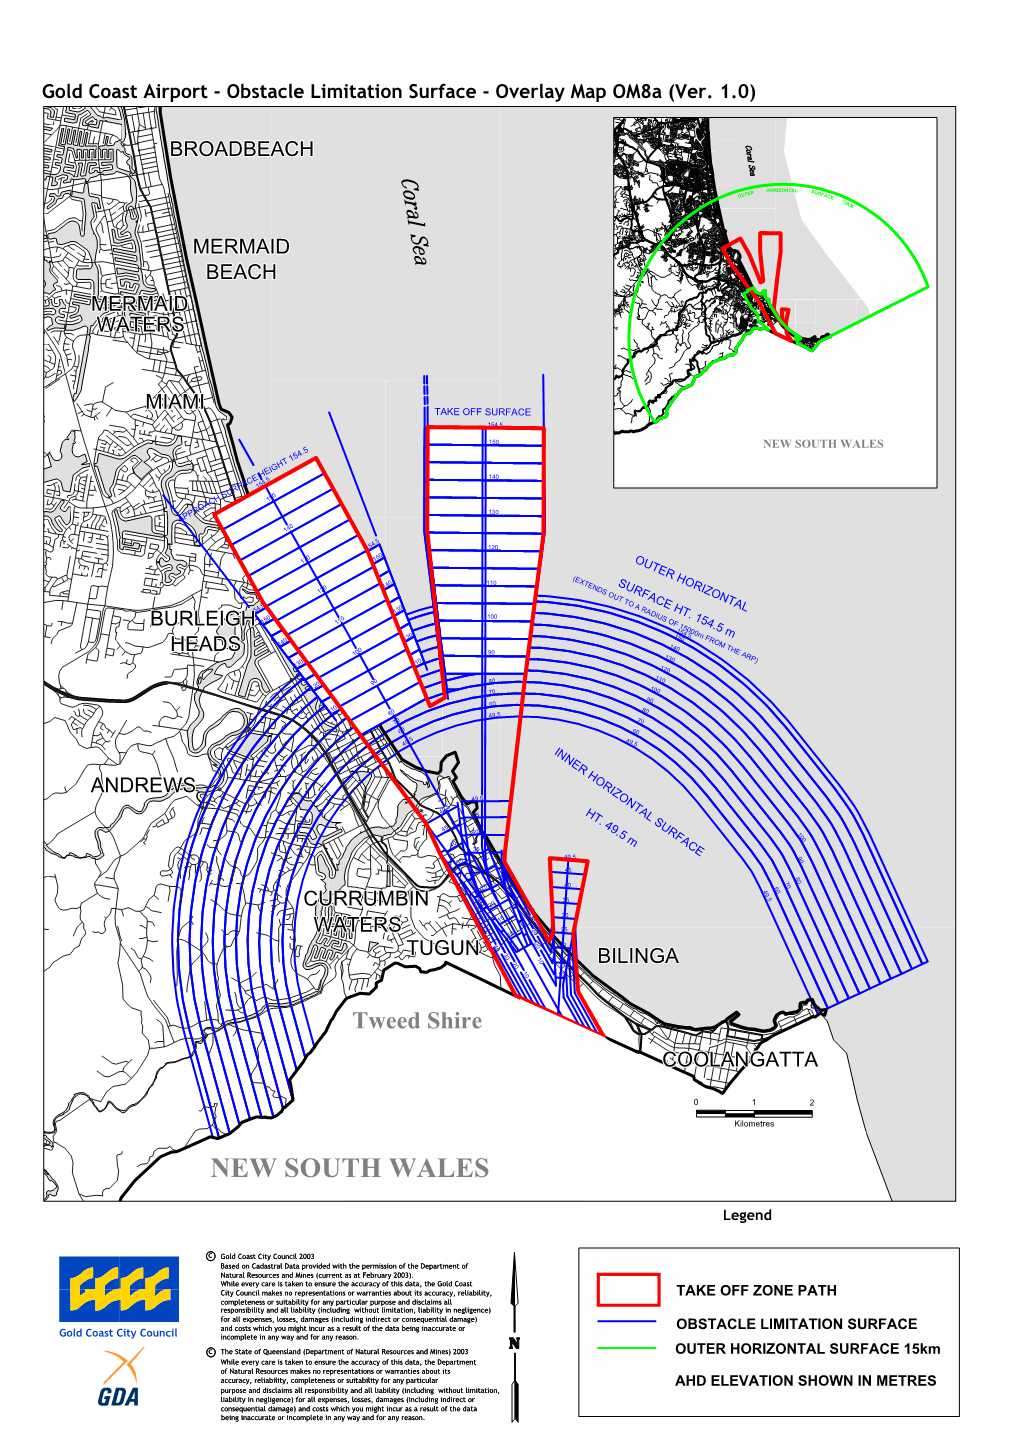 Gold Coast Airport - Obstacle Limitation Surface - Overlay Map Om8a (Ver